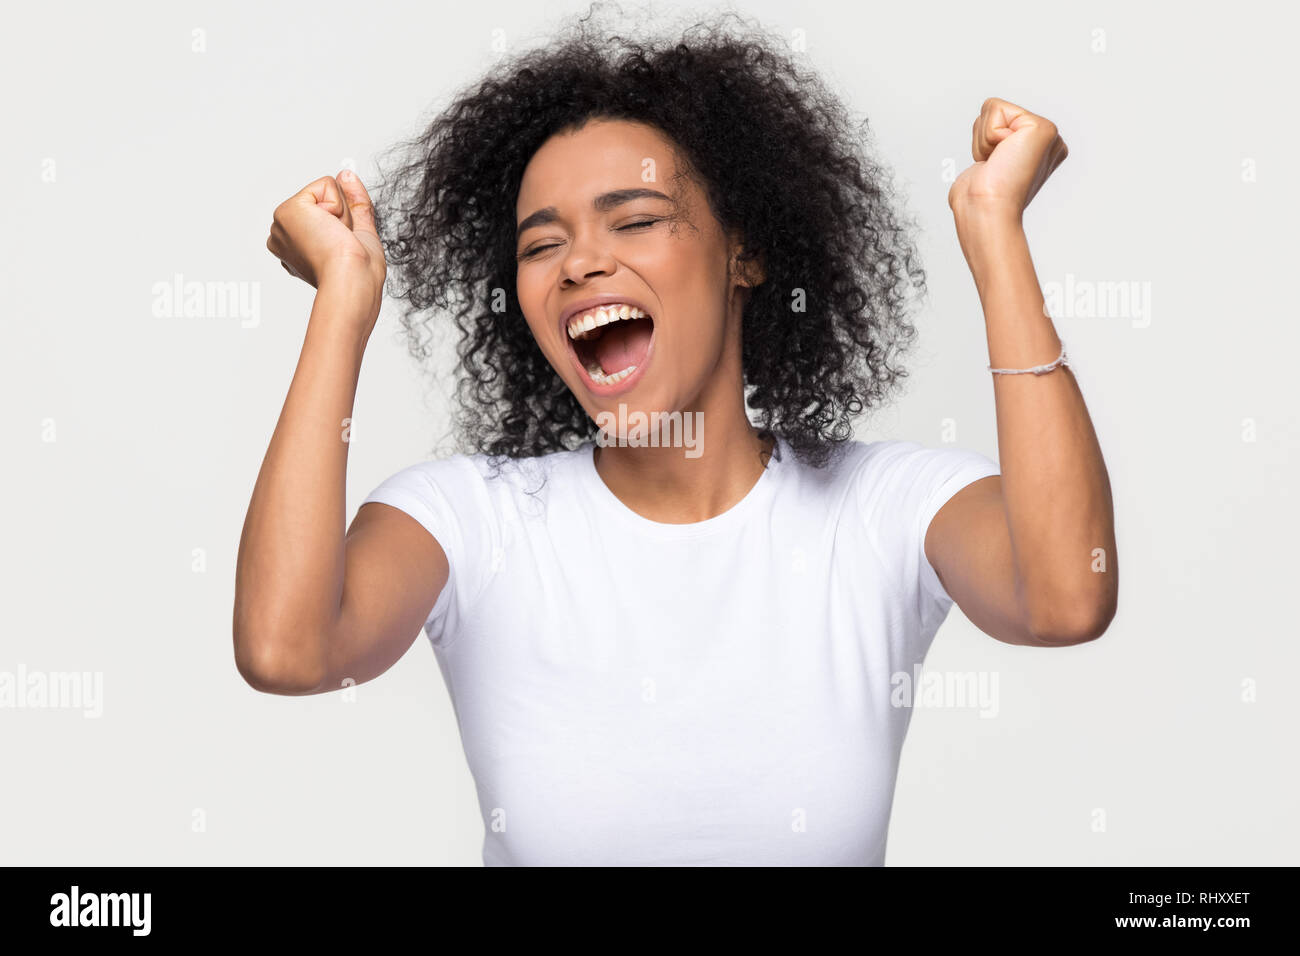 Overjoyed young african american woman screaming with joy celebrating victory Stock Photo